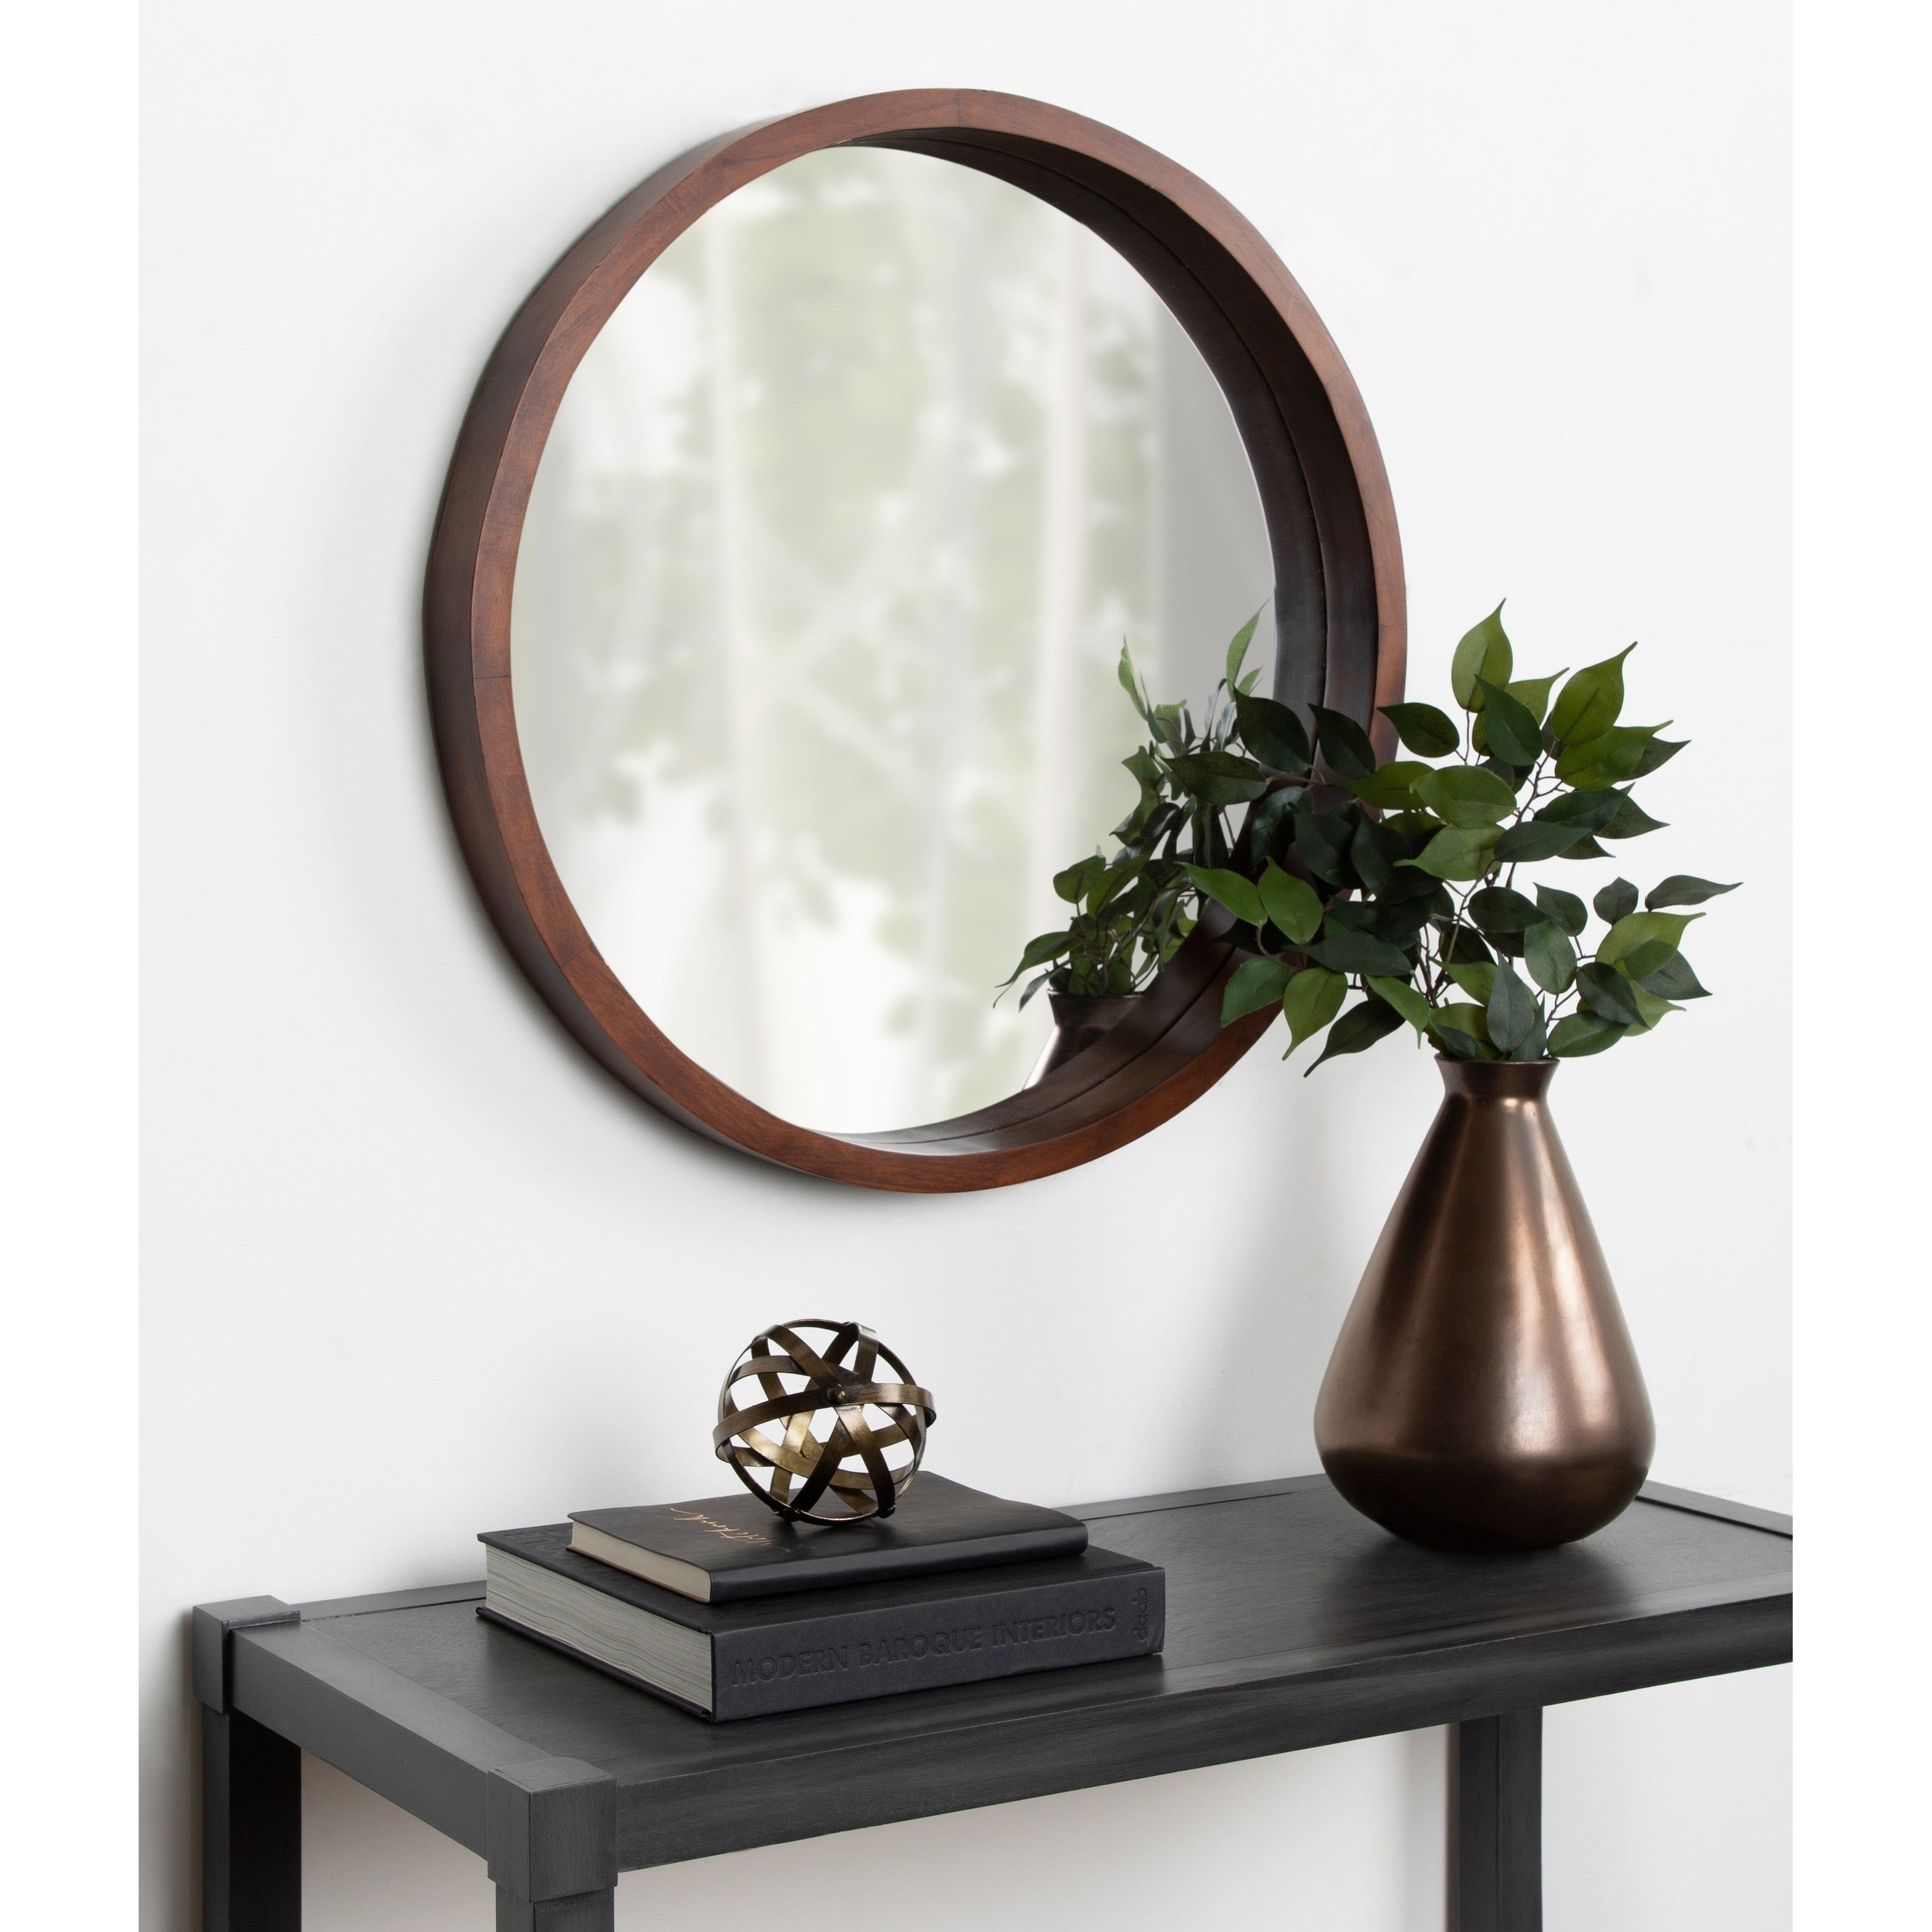 Accent Mirrors | Shop Online At Overstock Pertaining To Derick Accent Mirrors (View 7 of 30)